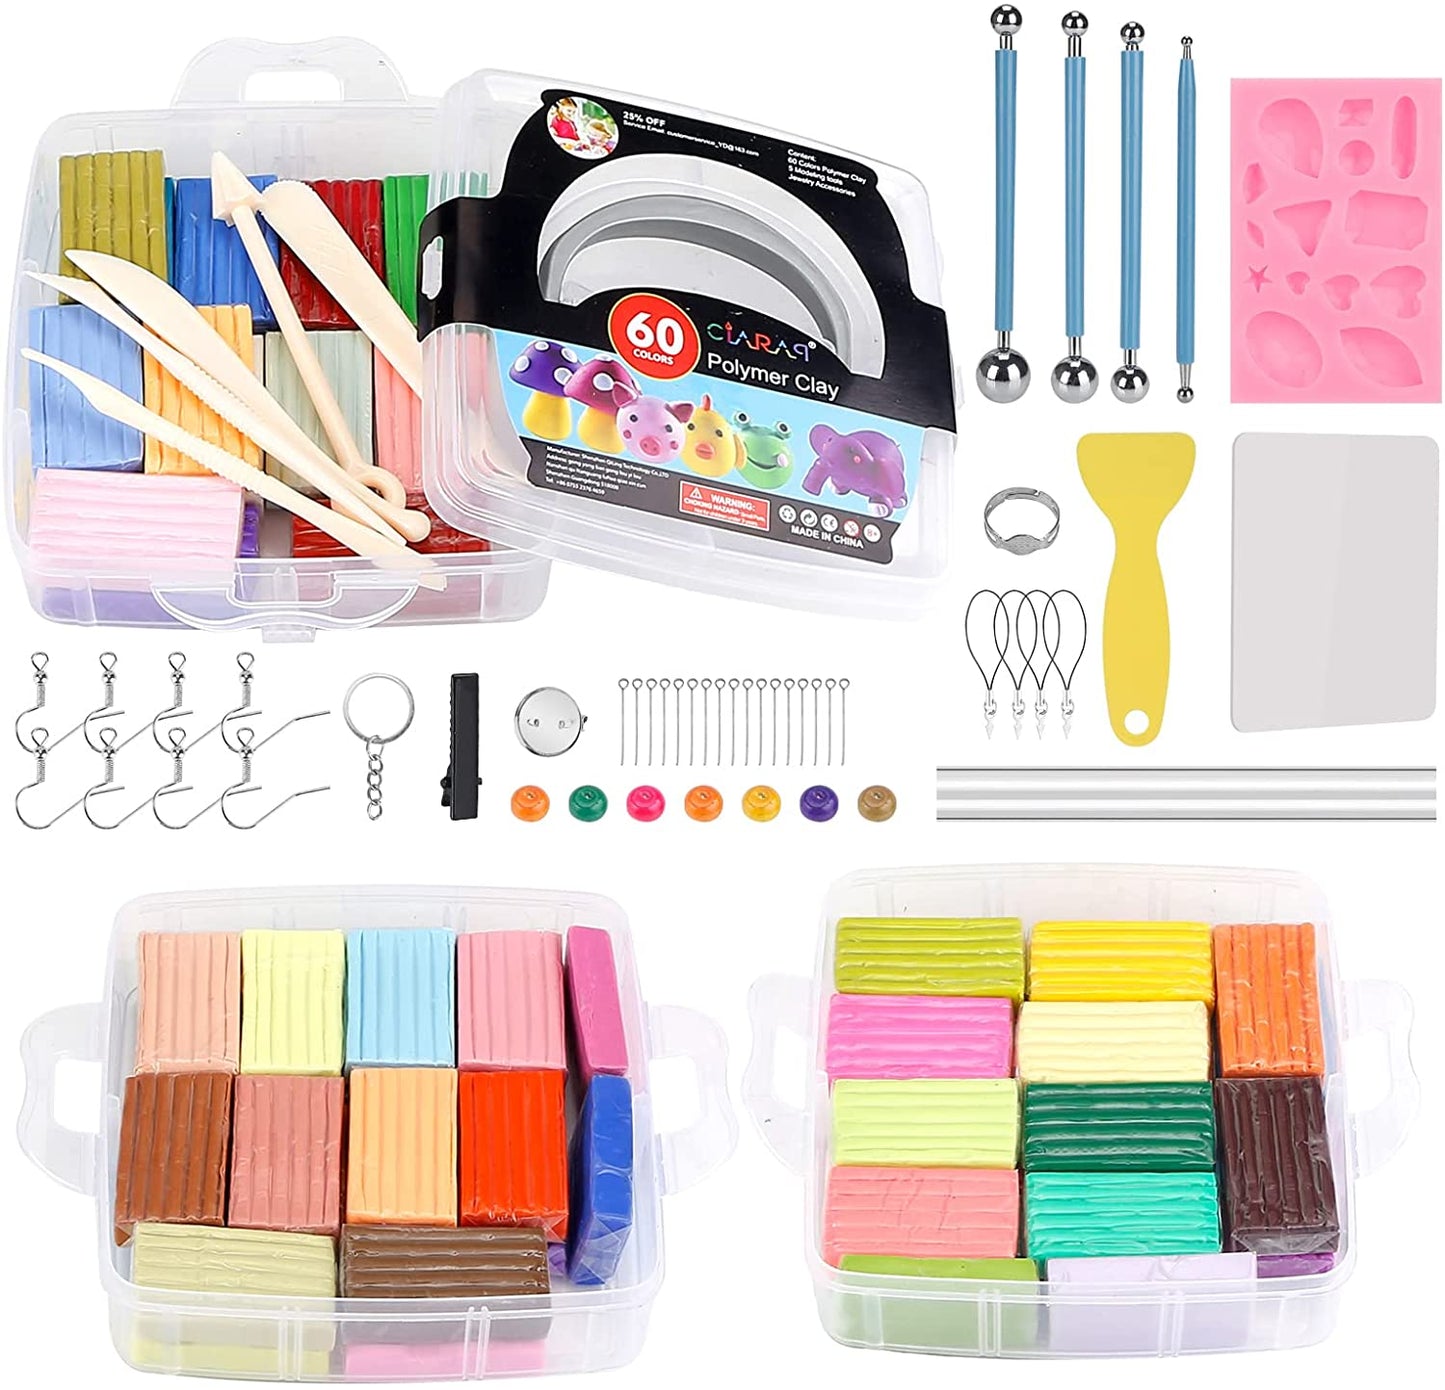 Buy Polymer Clay Kit, Oven Bake Modeling Clay for Adults and Kids, Polymer  Clay Starter Kit, Modeling Clay Set, Non-Toxic DIY Modeling Clay Assorted  with Sculpting Tools. Great for Kids, Beginners, Artists